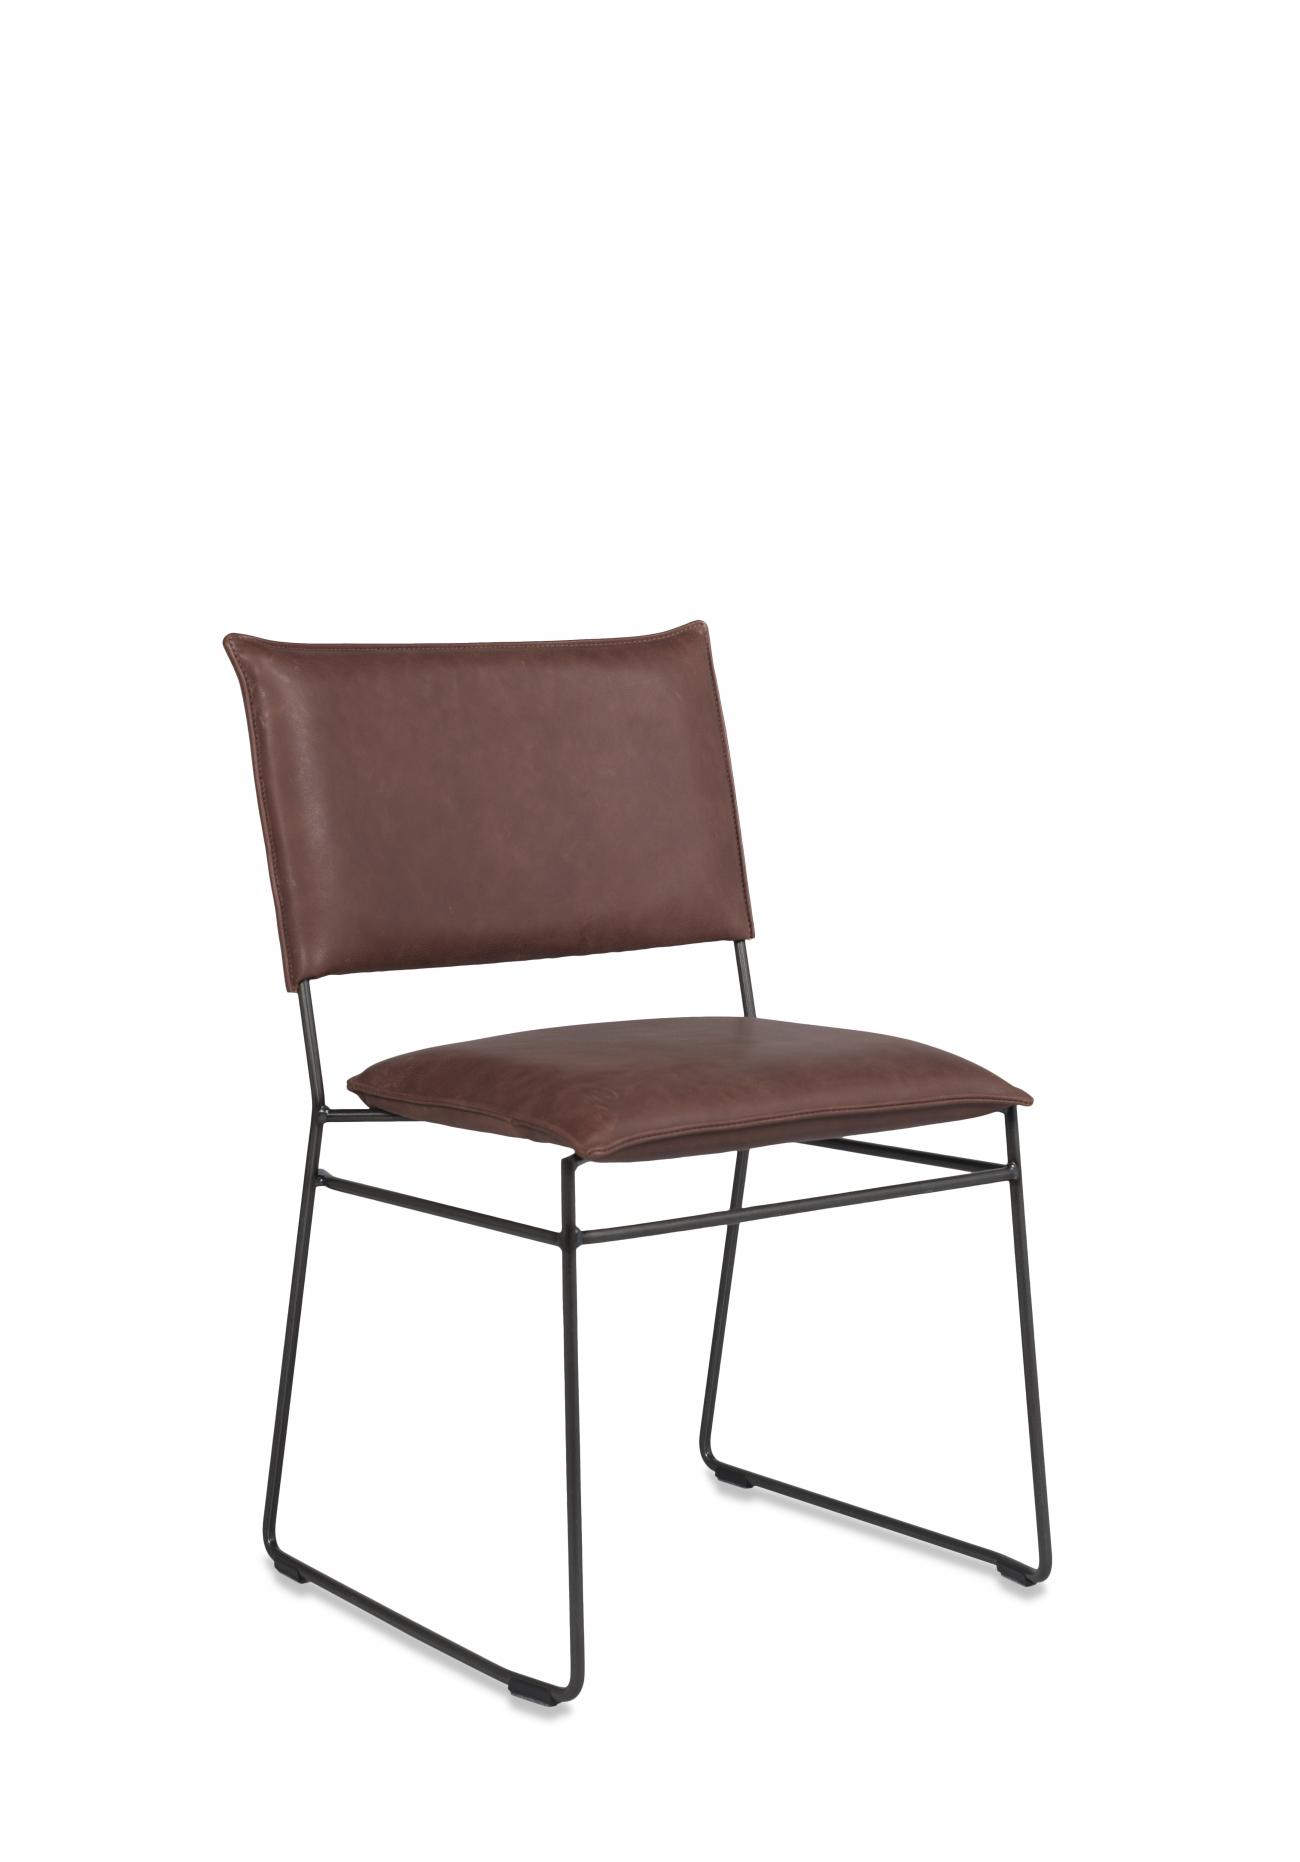 https://www.fundesign.nl/media/catalog/product/n/o/norman_diningchair_stackable_frame_old_glory_bonanza_british_tan_oblique.jpg